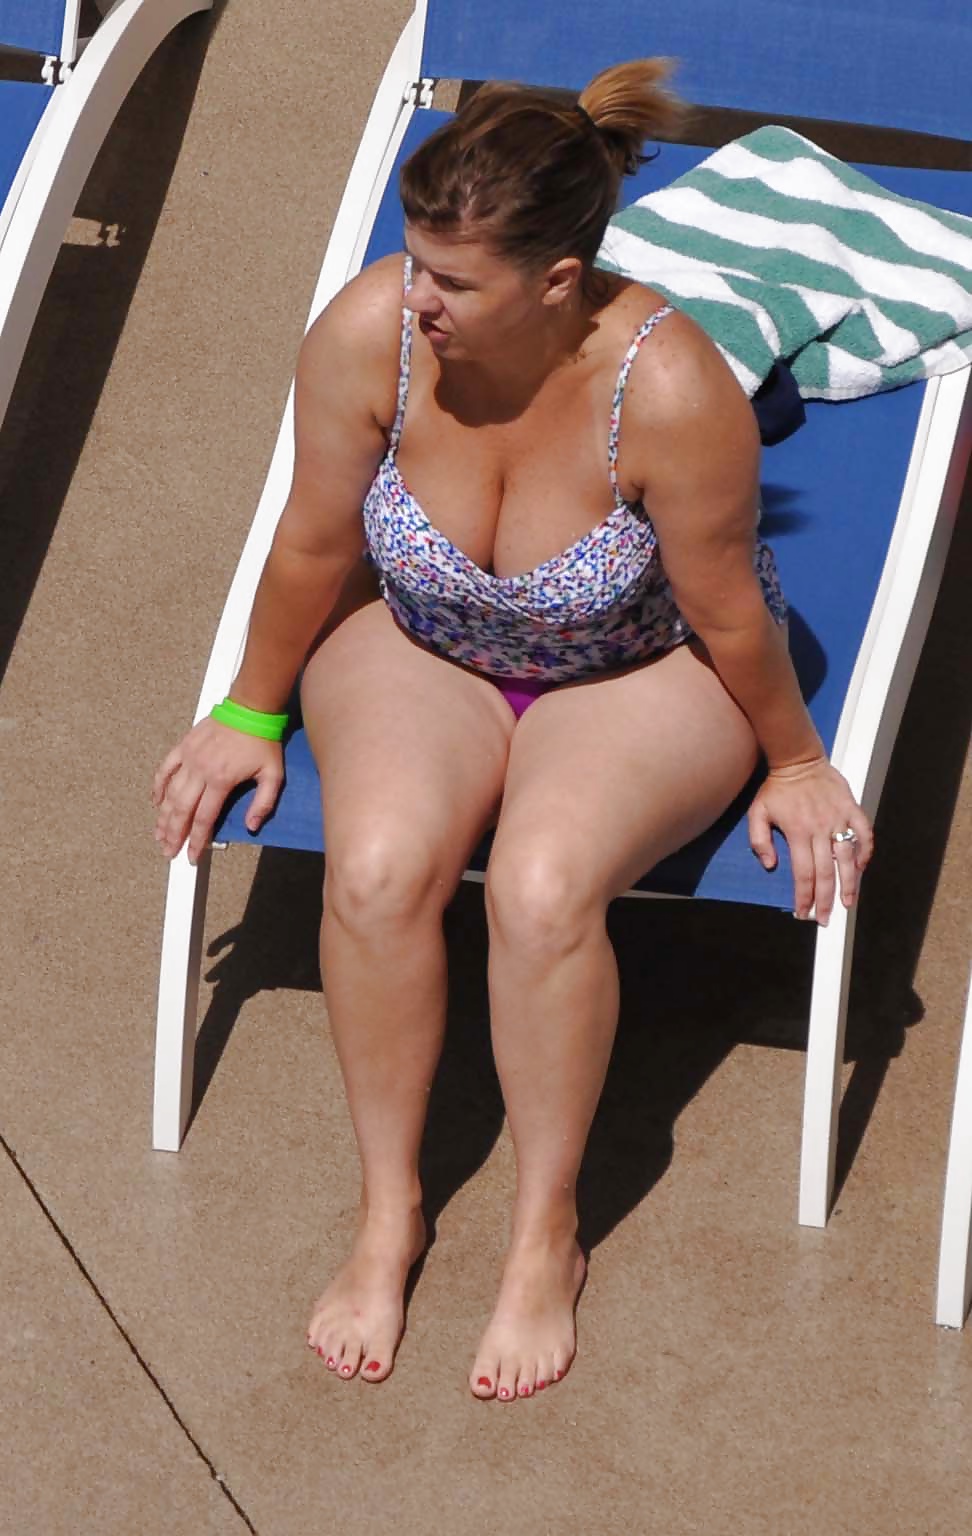 Candid MILF Mom Fat Tits Ass by Pool #39786524